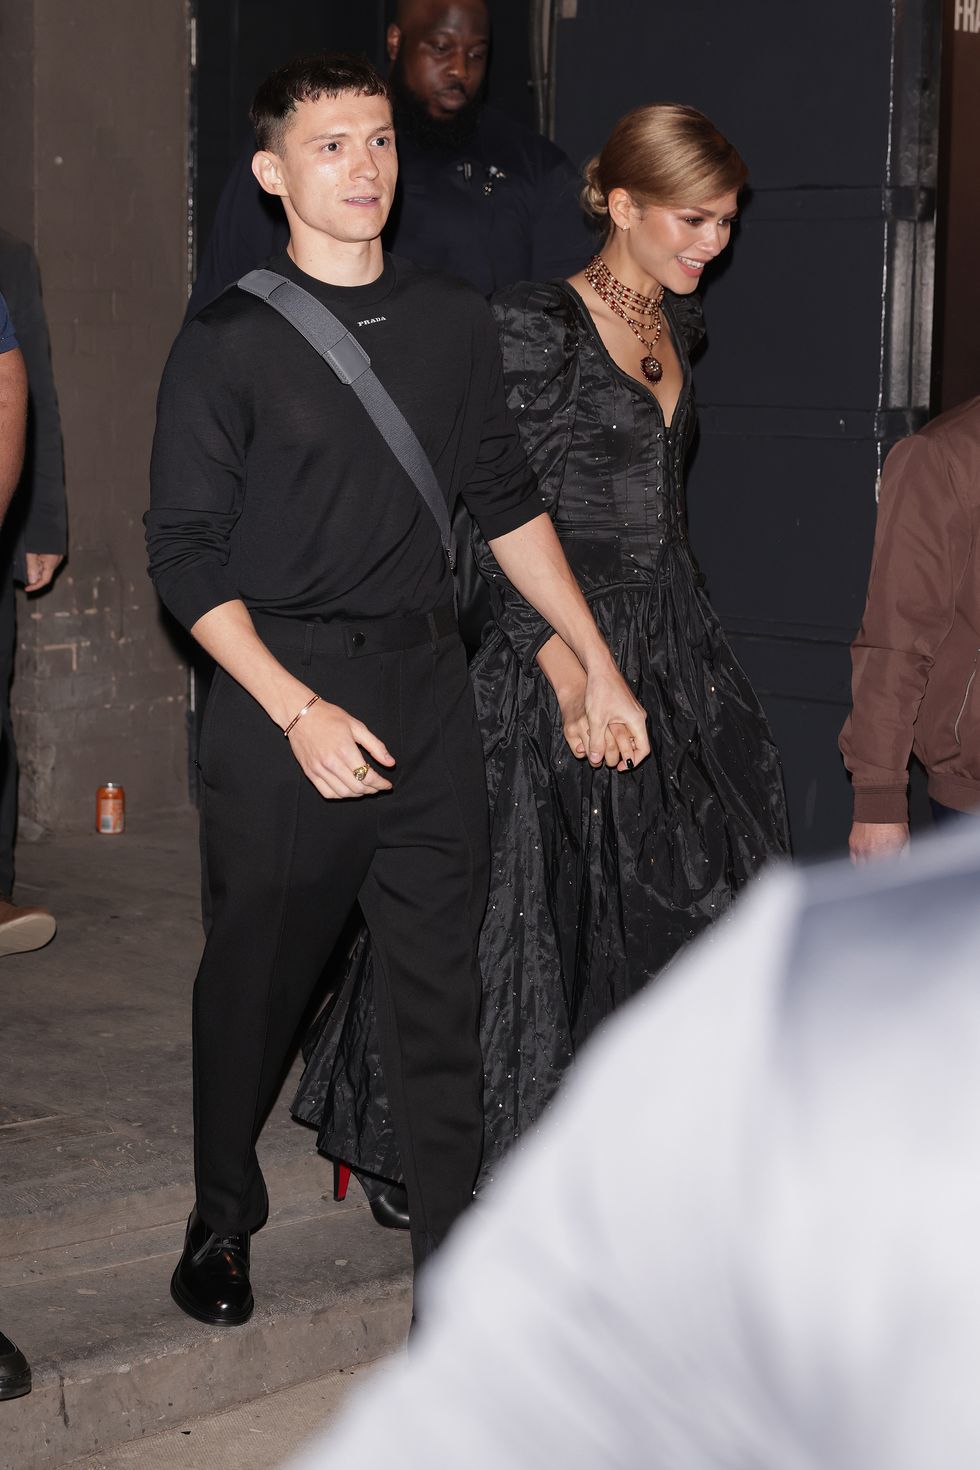 london, england may 23 tom holland and zendaya are seen leaving the duke of yorks theatre after a romeo and juliet press night on may 23, 2024 in london, england photo by ricky vigil m justin e palmergc images